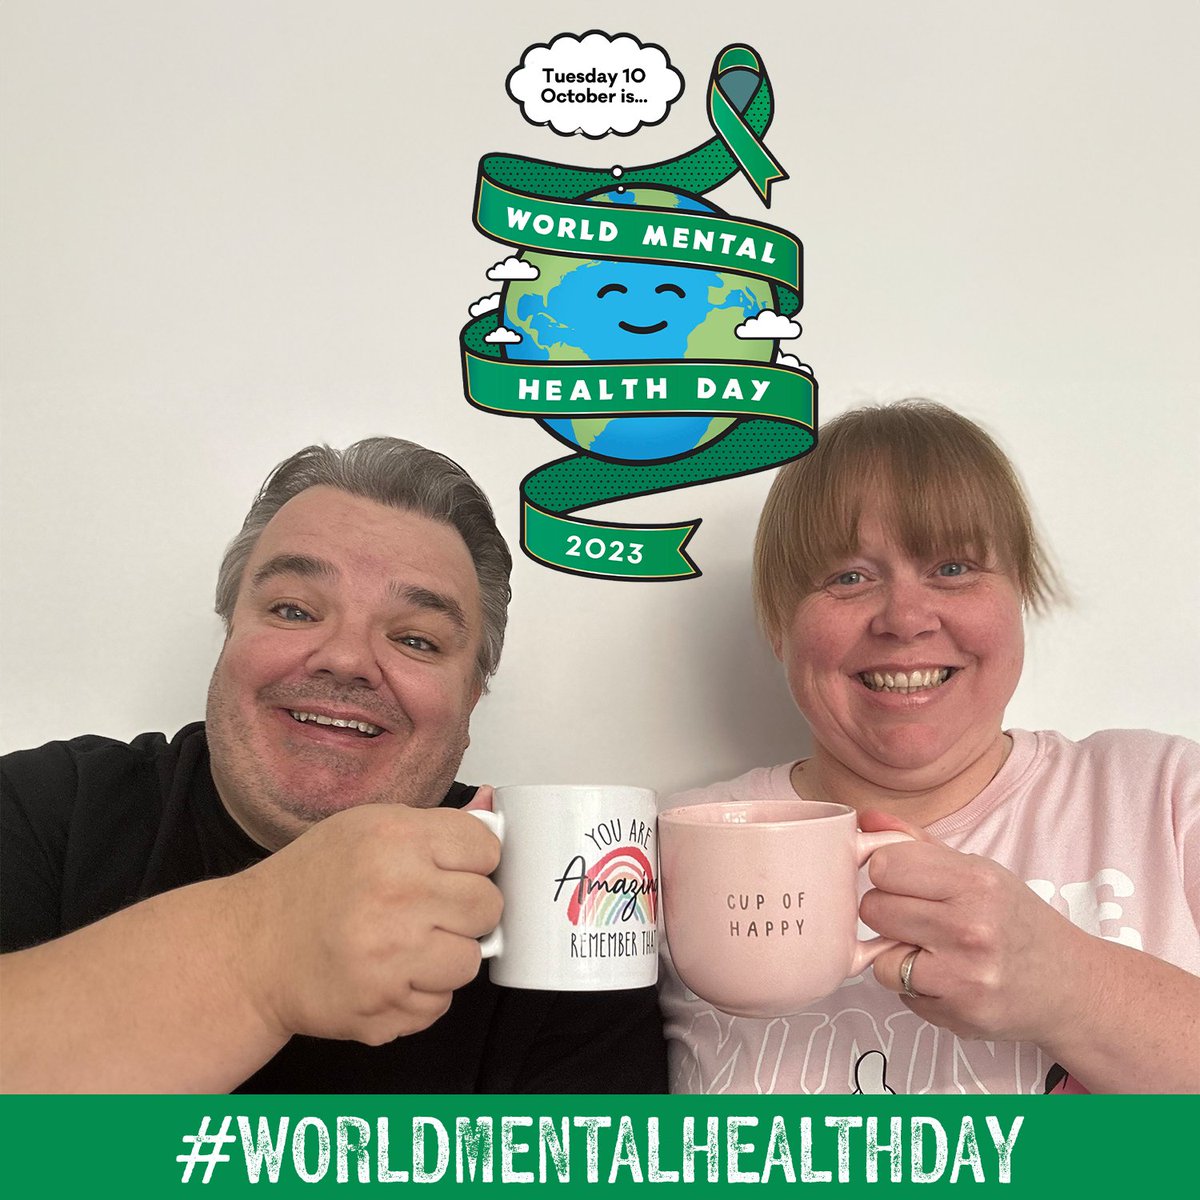 On World Mental Health Day, let's always remember the importance of acknowledging and nurturing our mental health. It should never be neglected, but treated with utmost care and compassion. #WorldMentalHealthDay 🌍💚